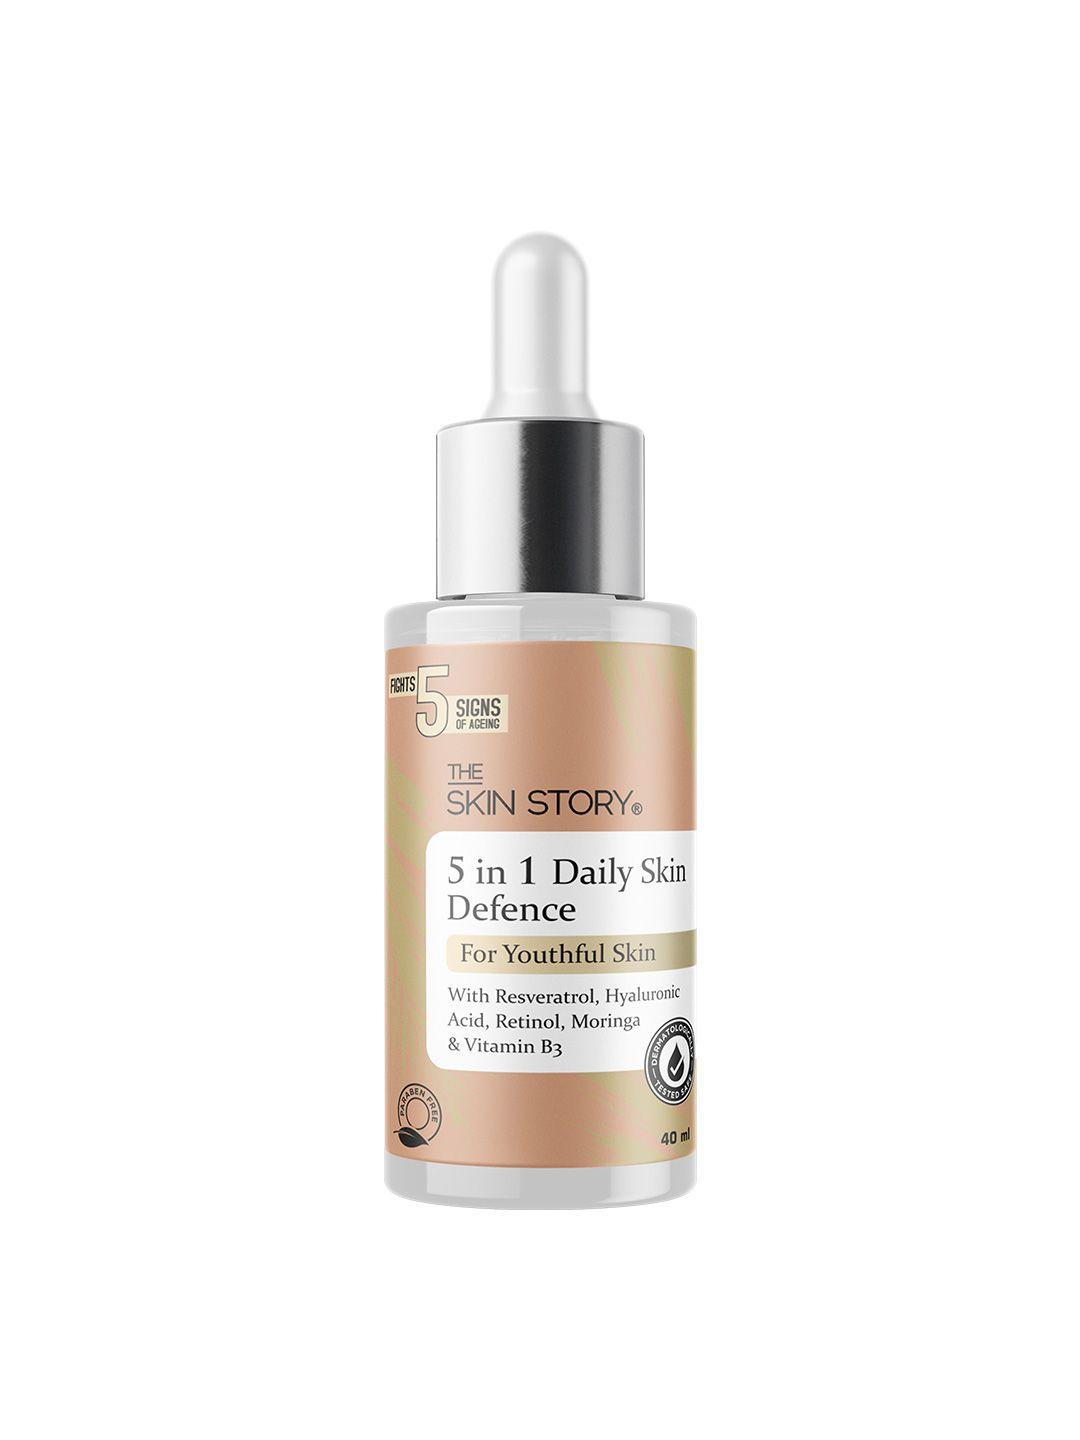 the skin story 5 in 1 daily skin defence serum 40 ml